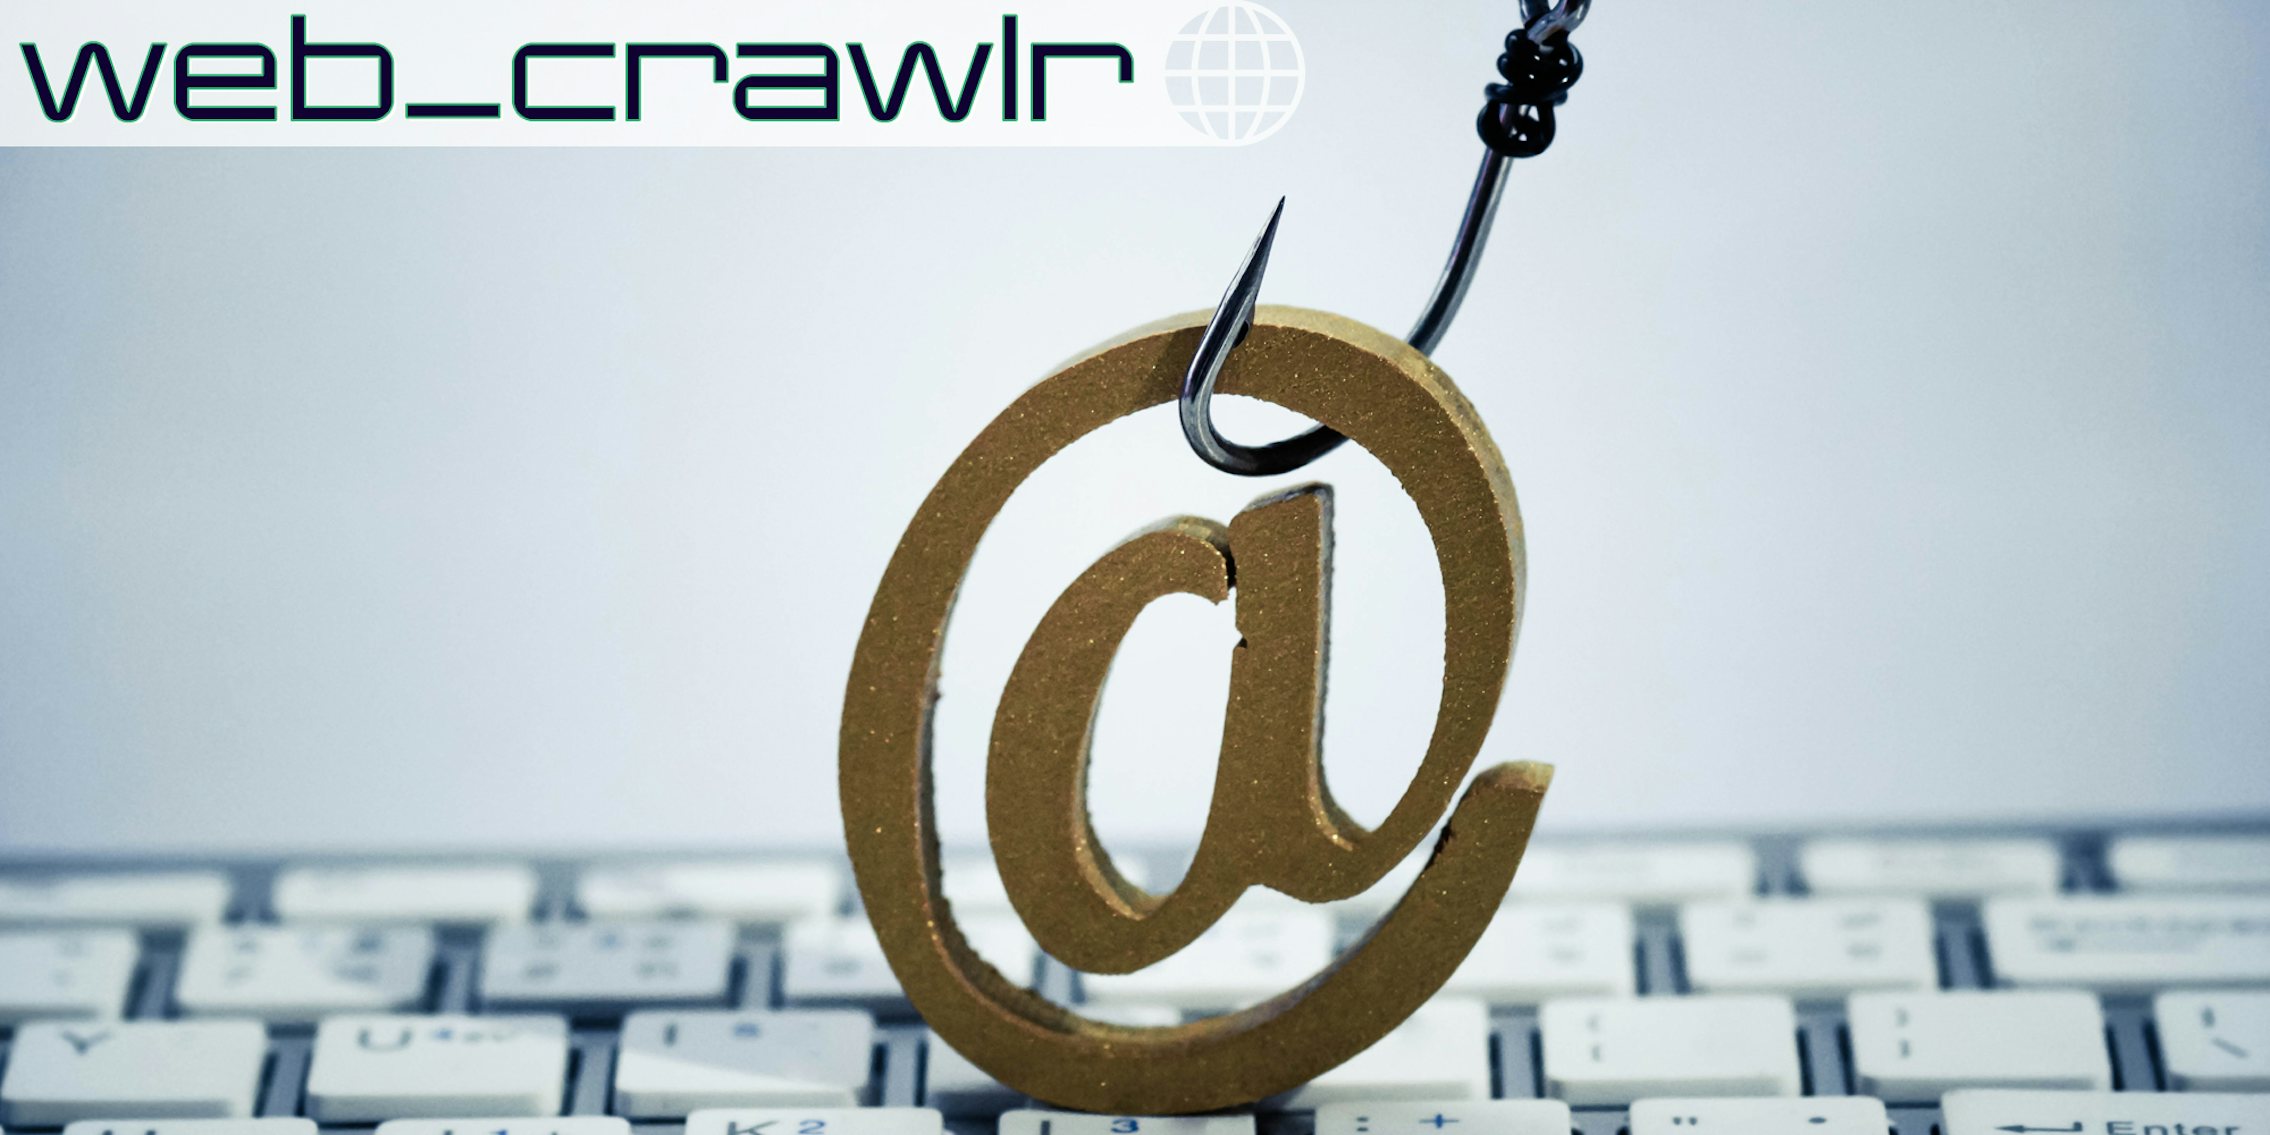 A fish hook with email sign on computer keyboard / Email phishing attack concept. The Daily Dot newsletter web_crawlr logo is in the top left corner.